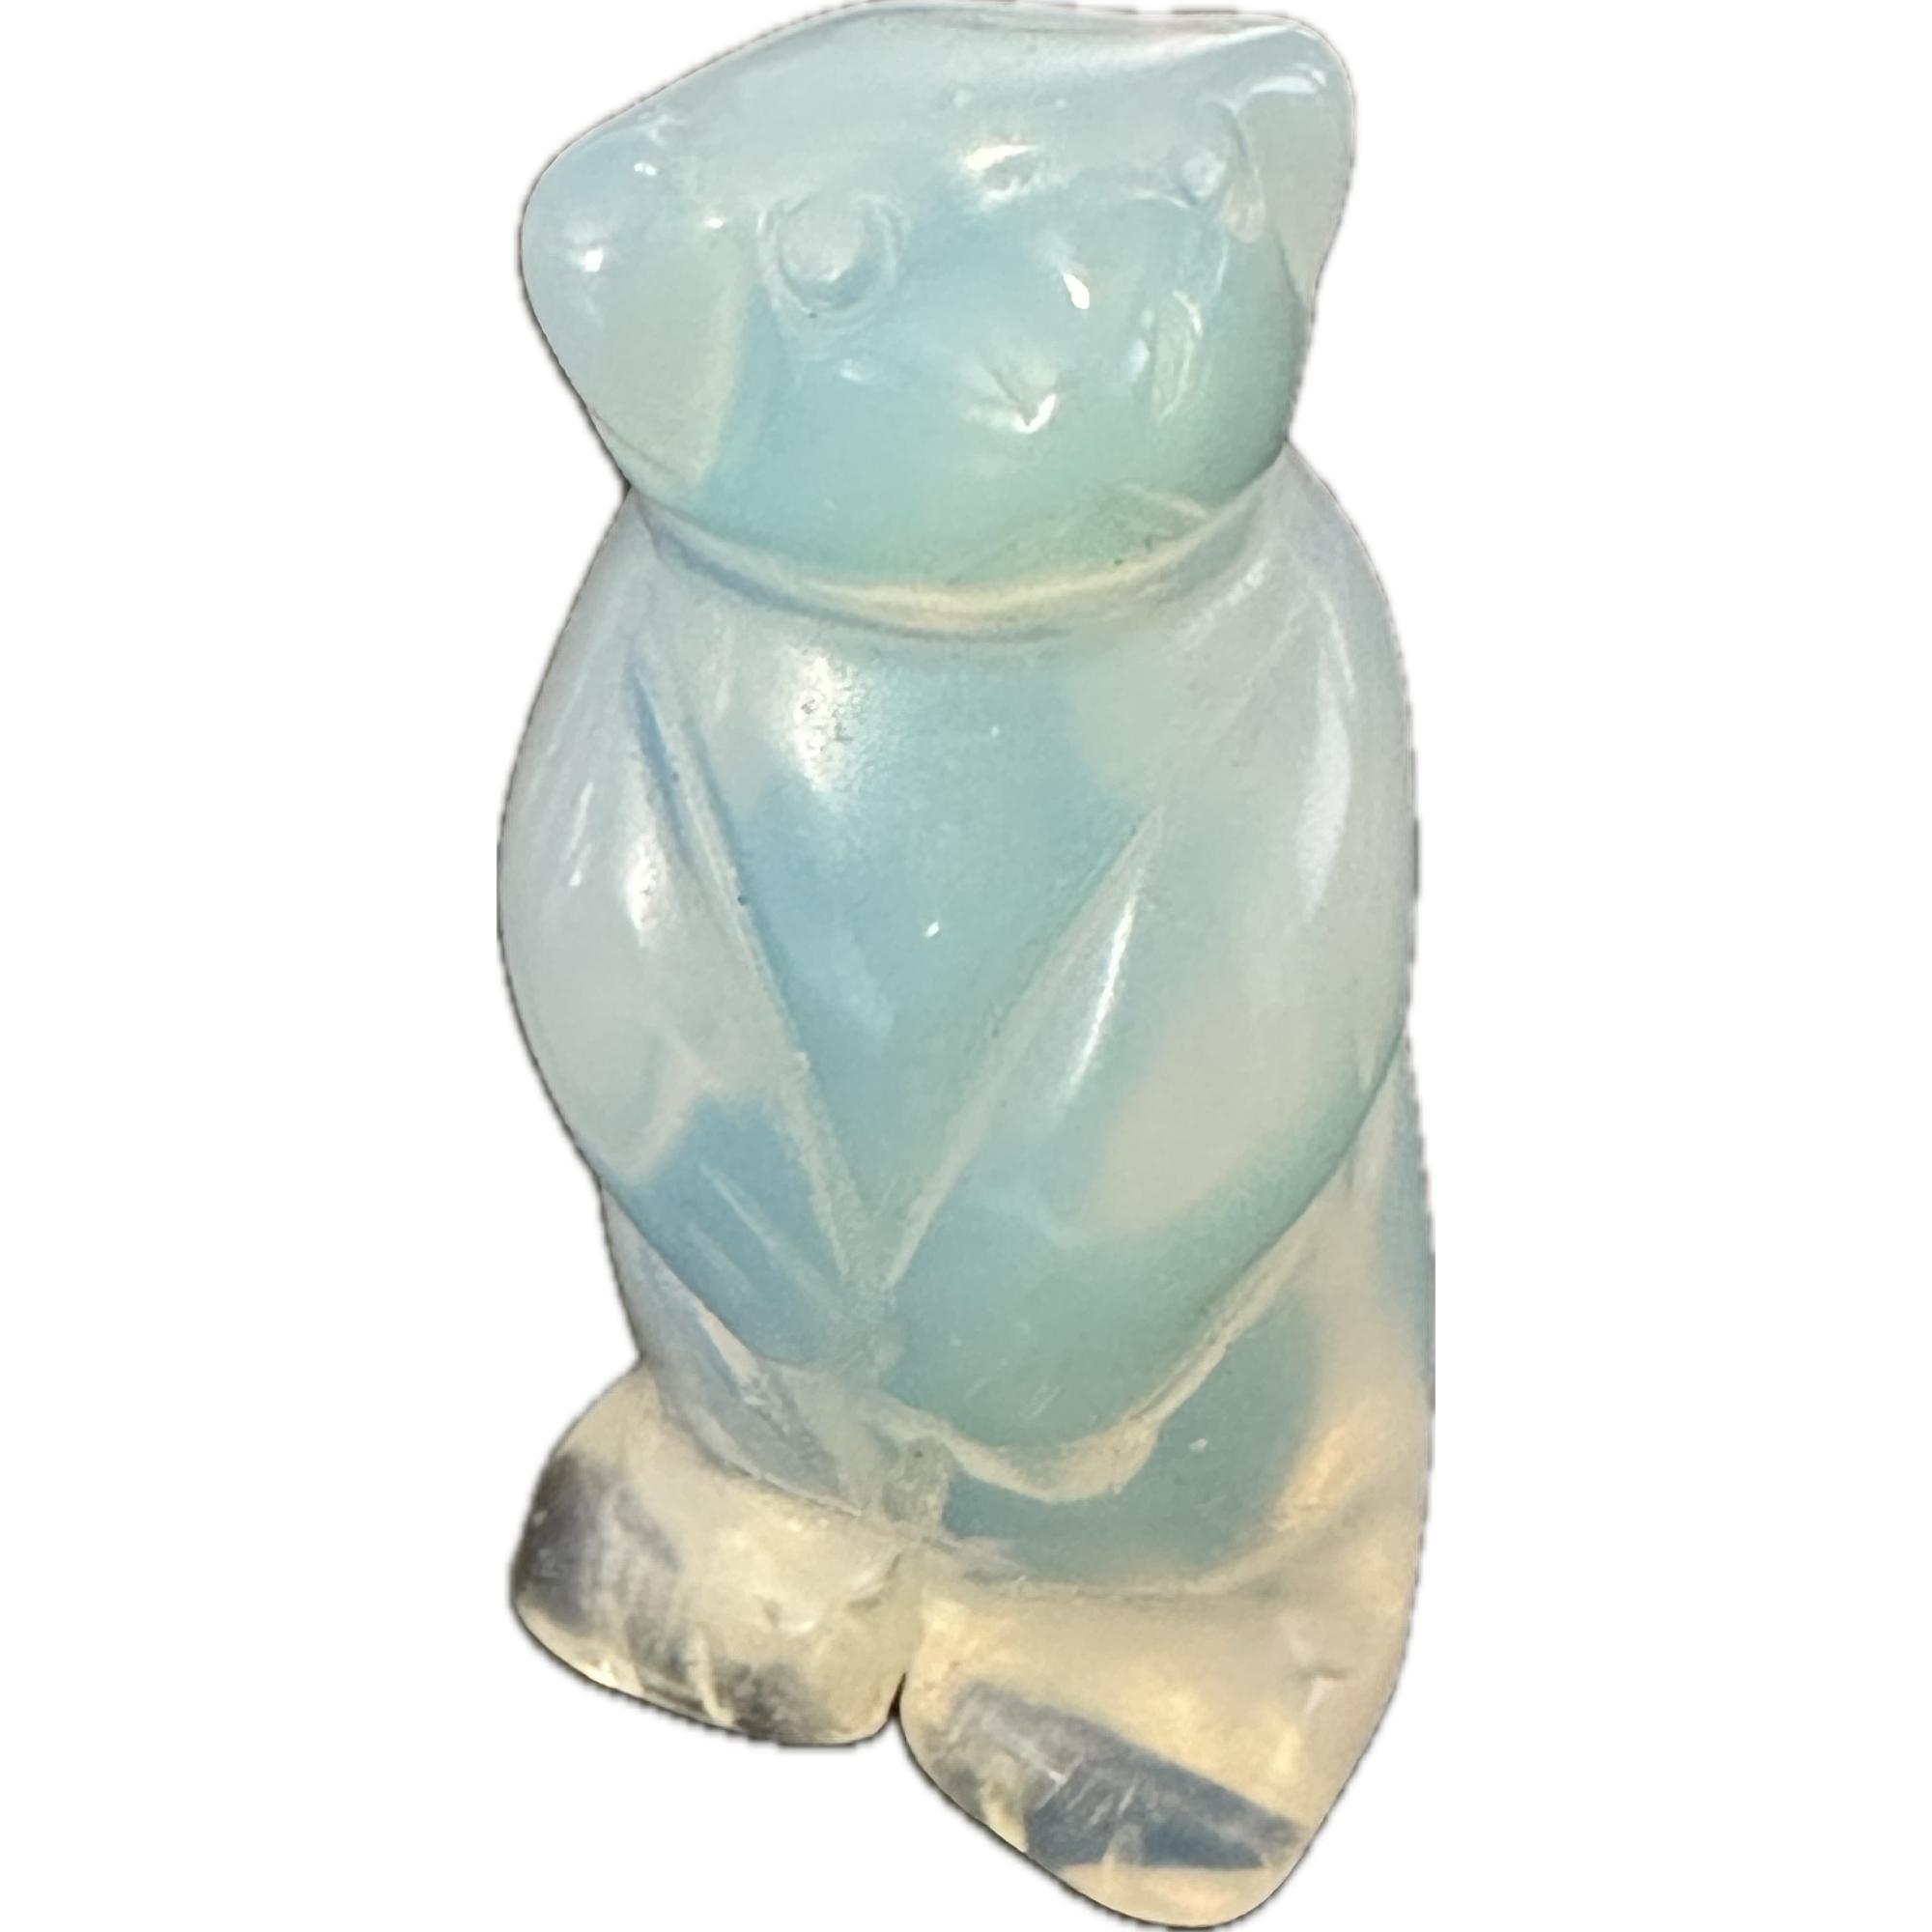 Opalite Sea Otter, 1 3/4 inches, Hand Carved Prehistoric Online